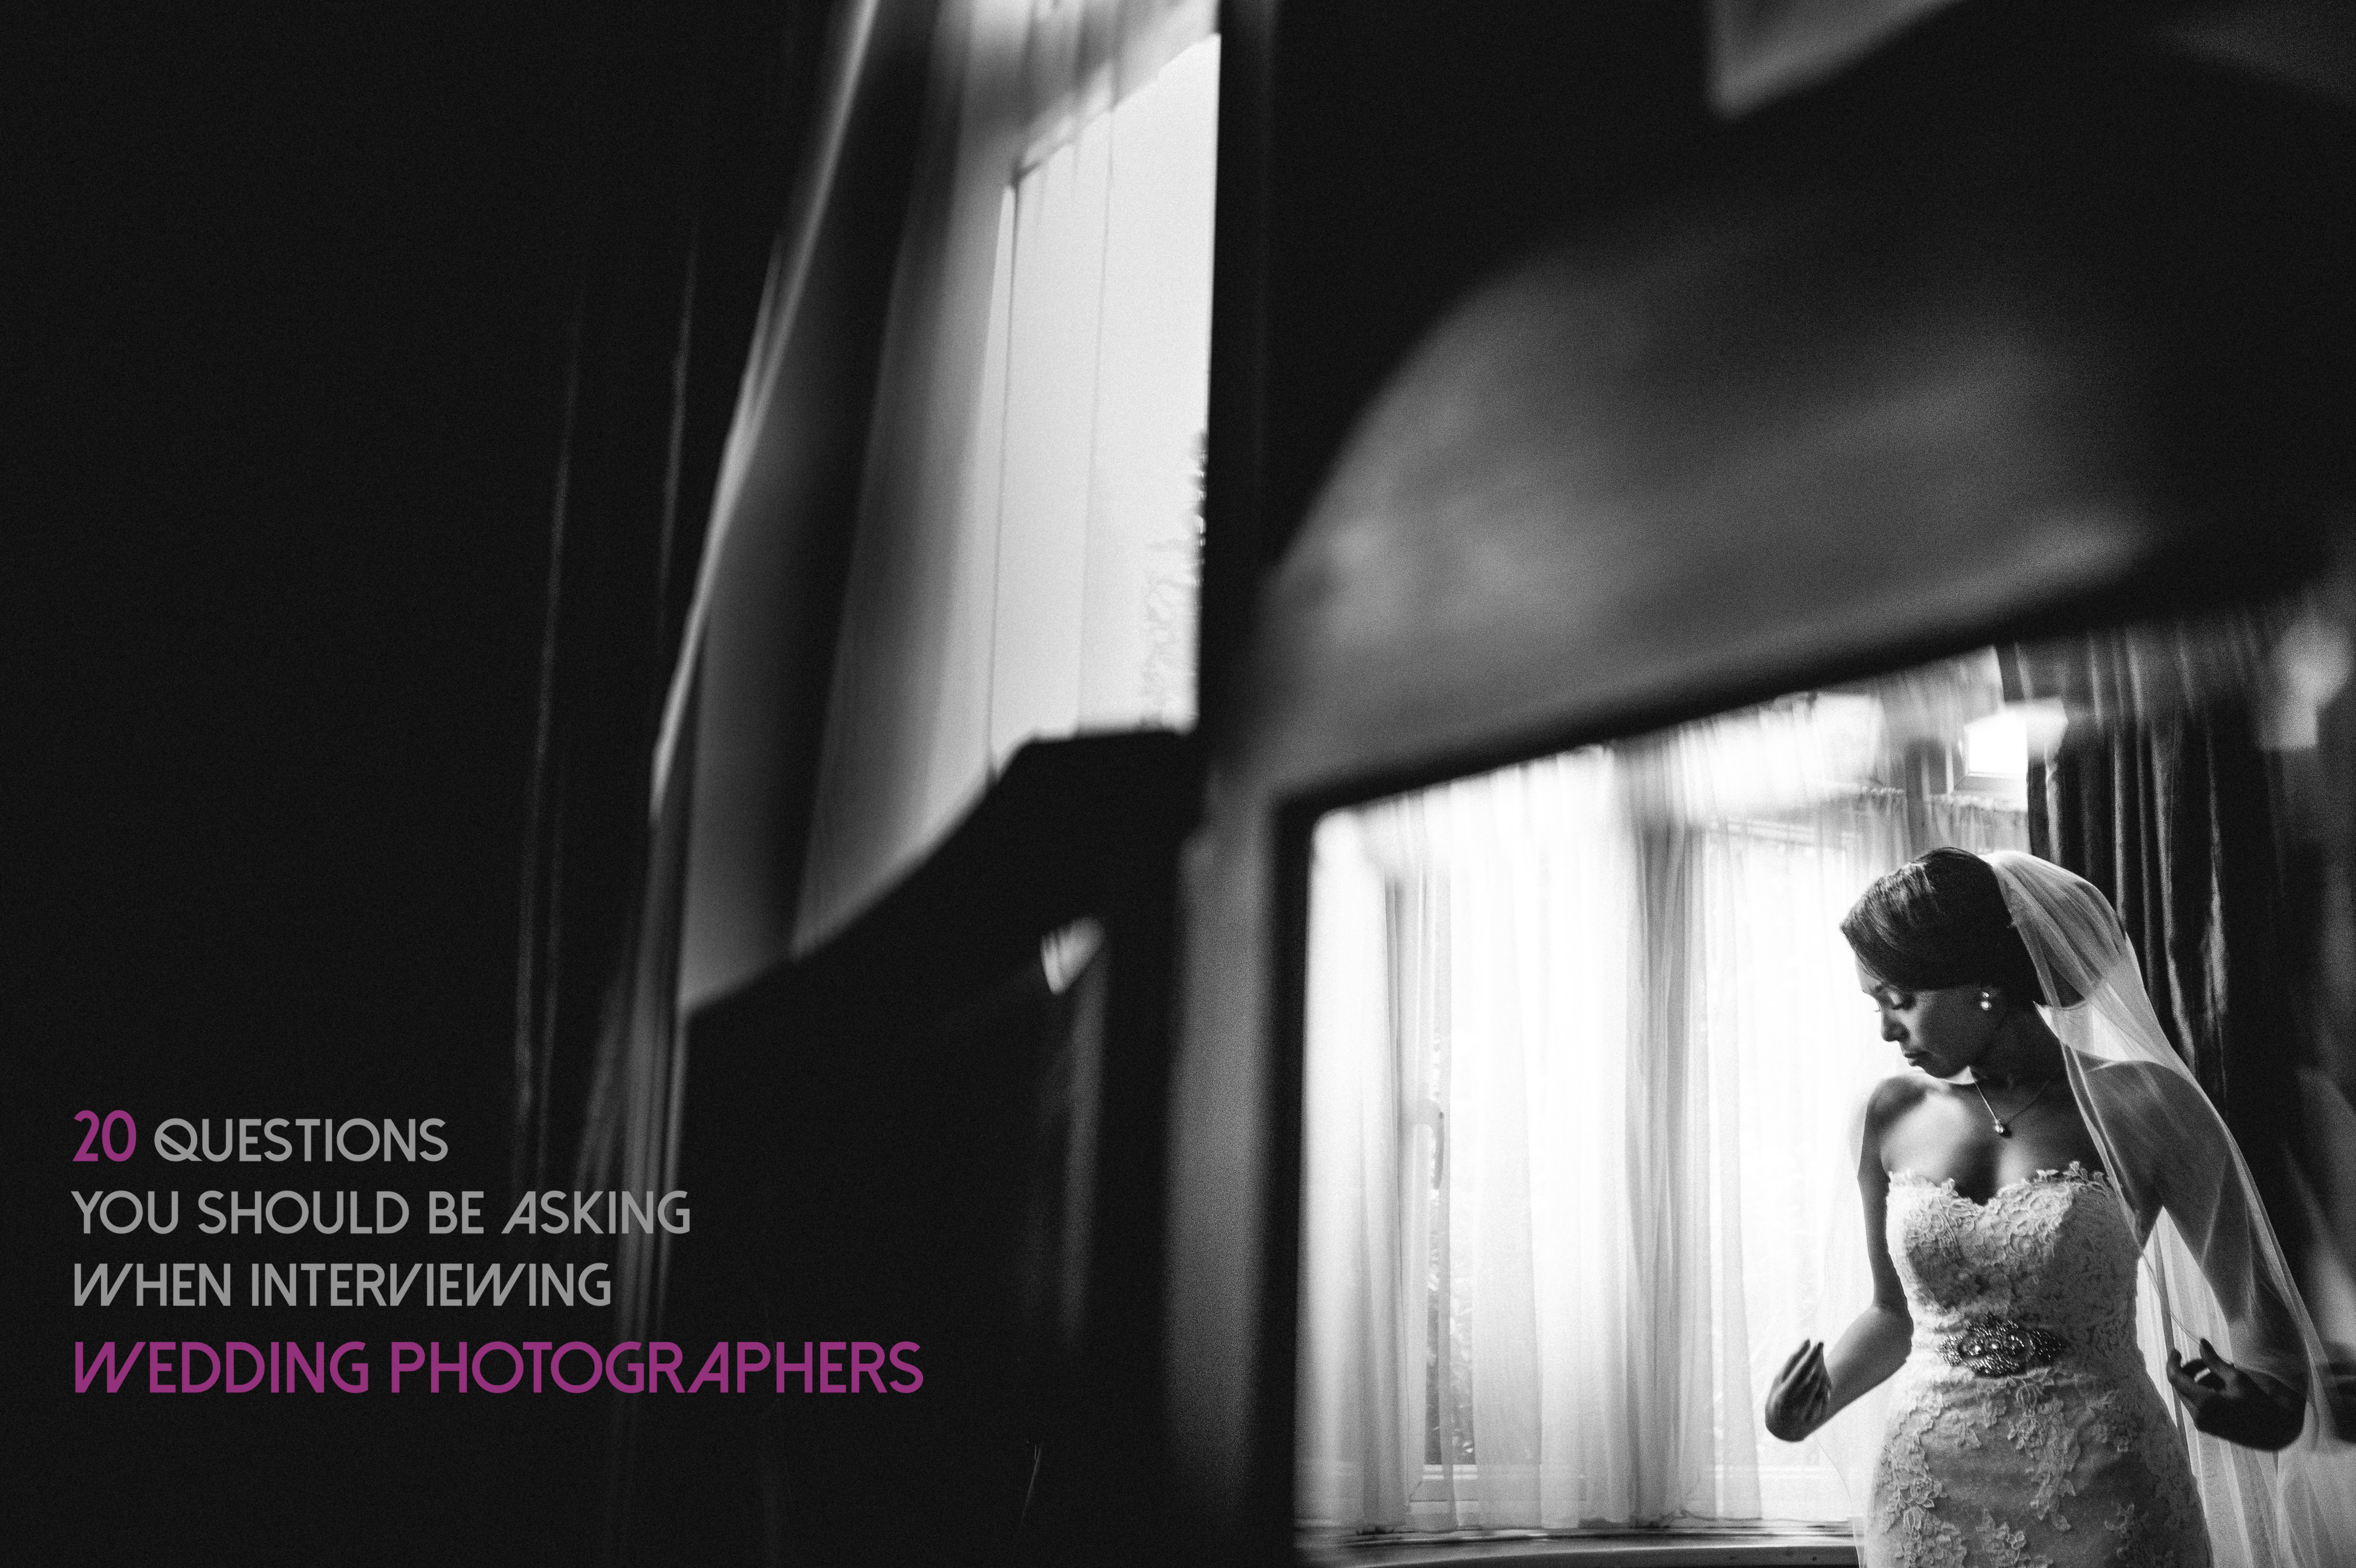 20 questions you should be asking when interviewing a wedding photographer